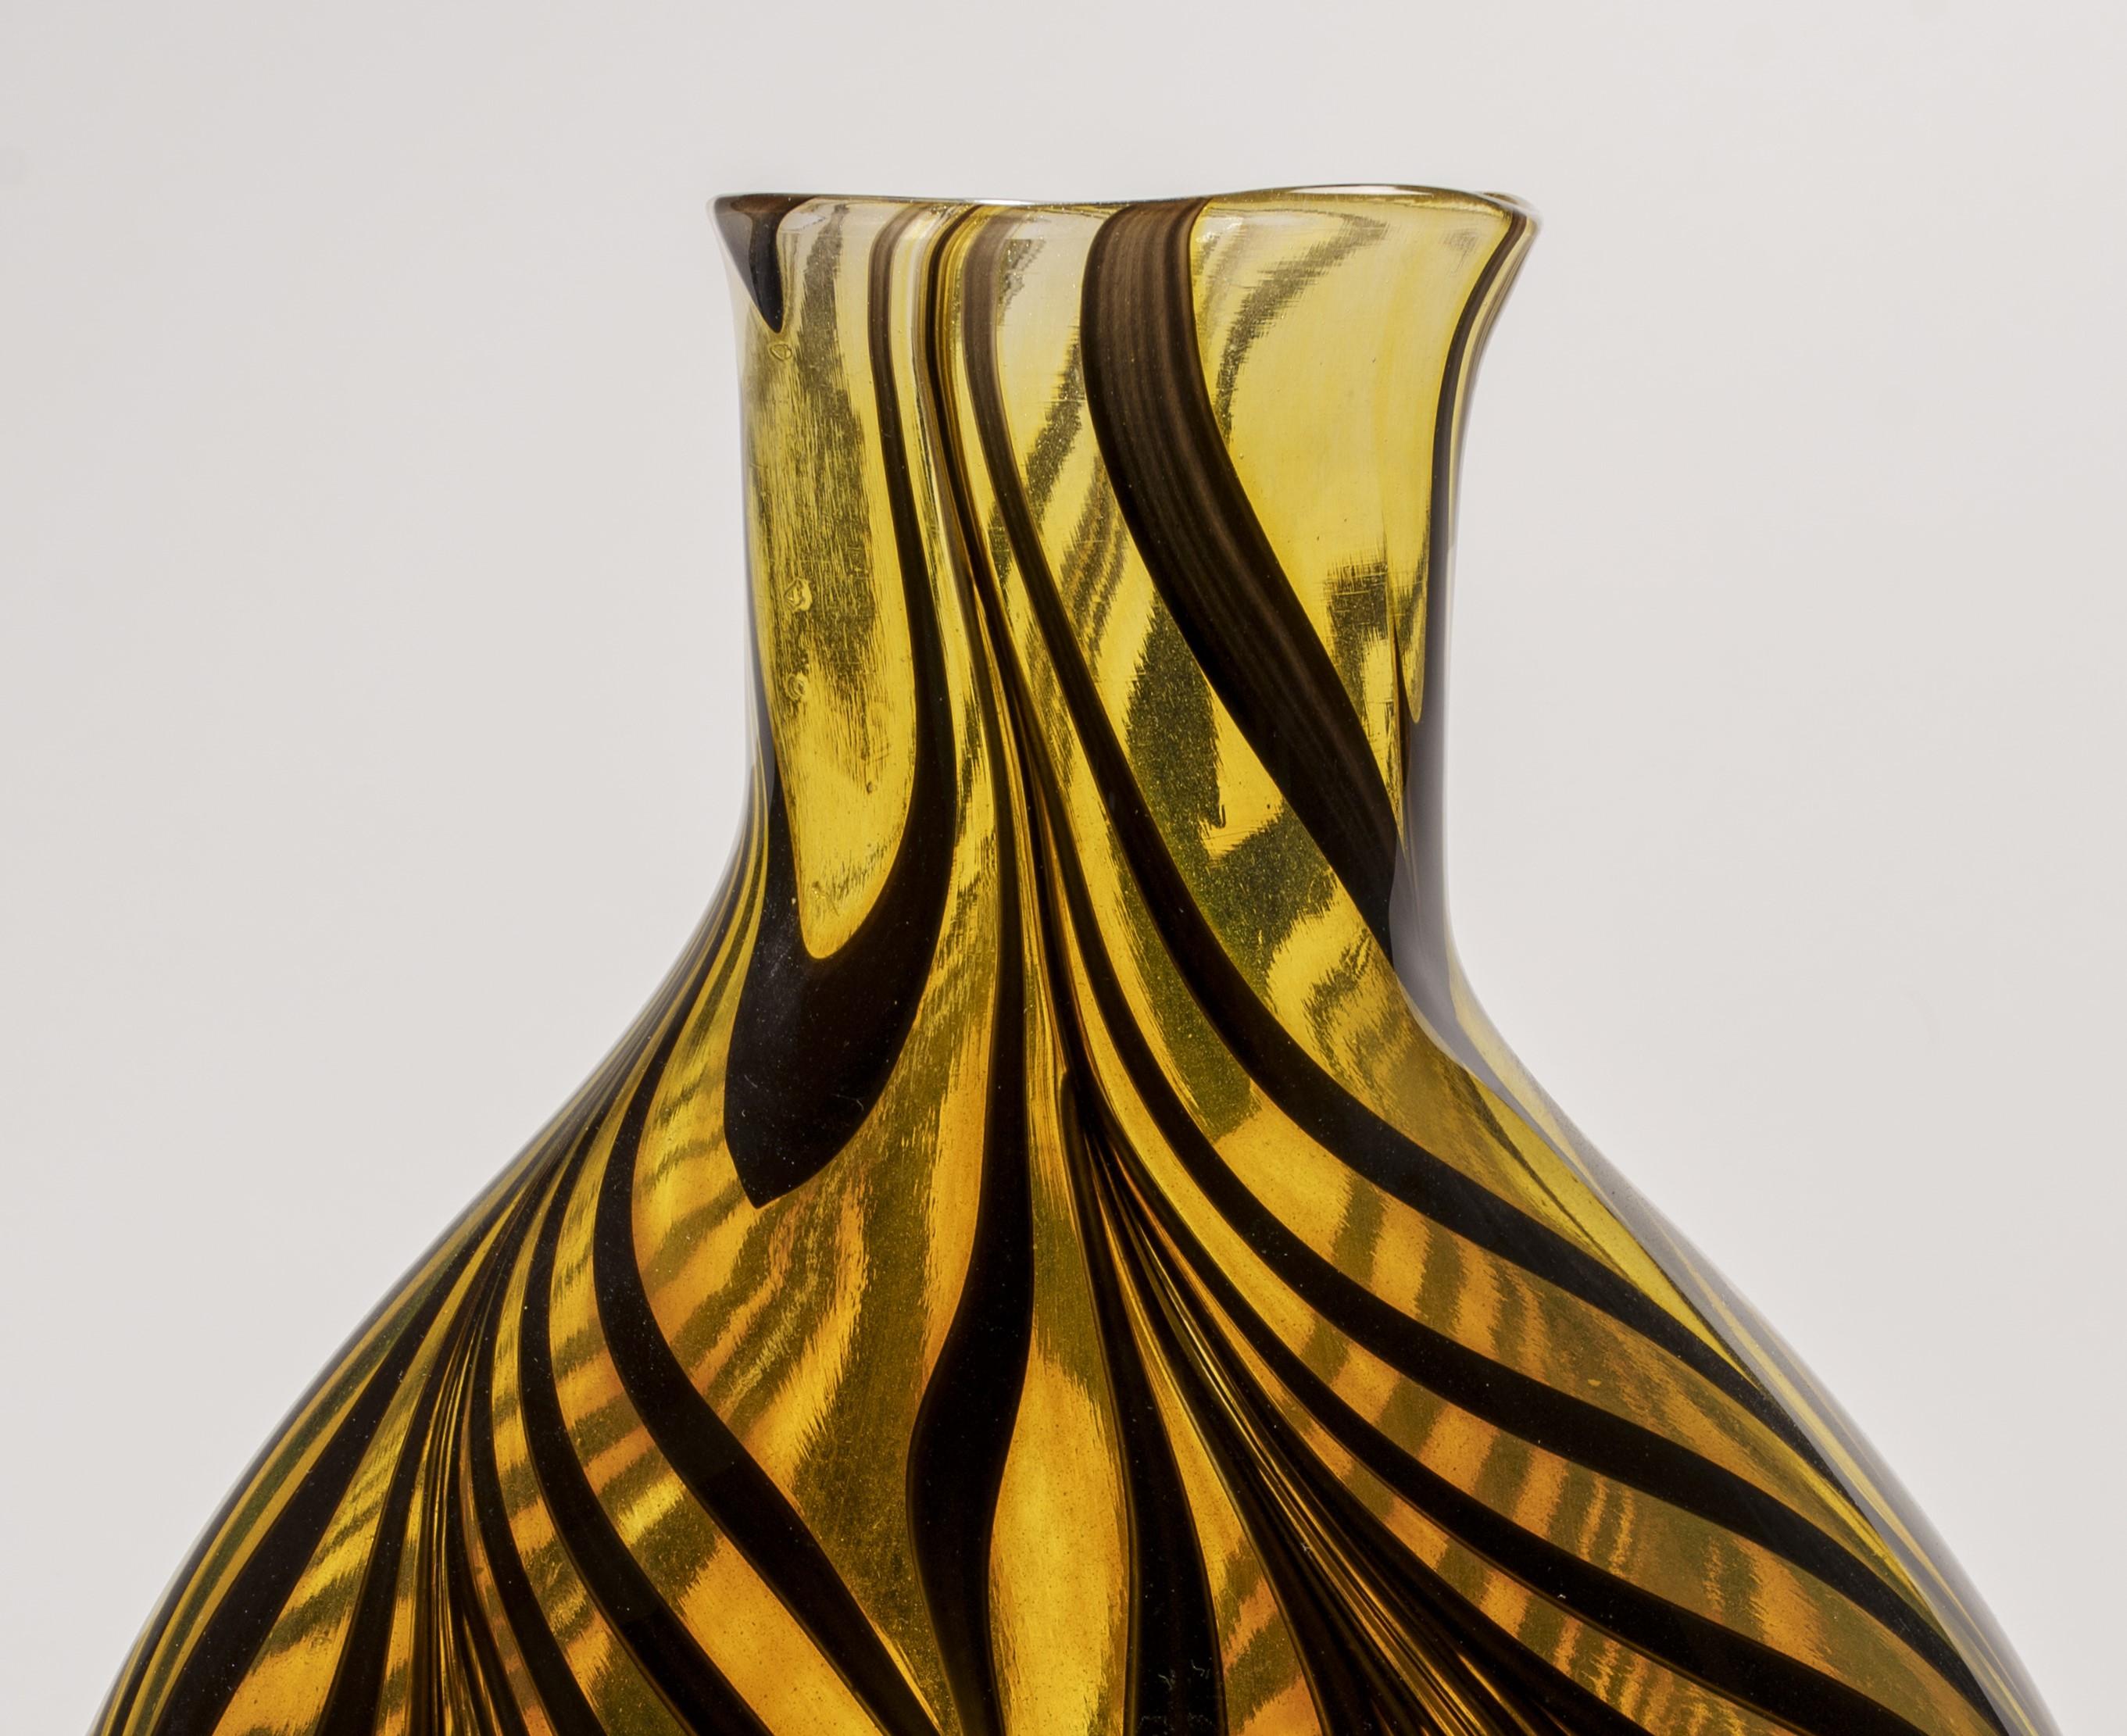 Jeremiah Jacobs, a talented glassblower, has crafted a captivating blown glass piece using the festooning technique. This extraordinary artwork features a striking tiger pattern created with black festooning on a vibrant yellow amber glass